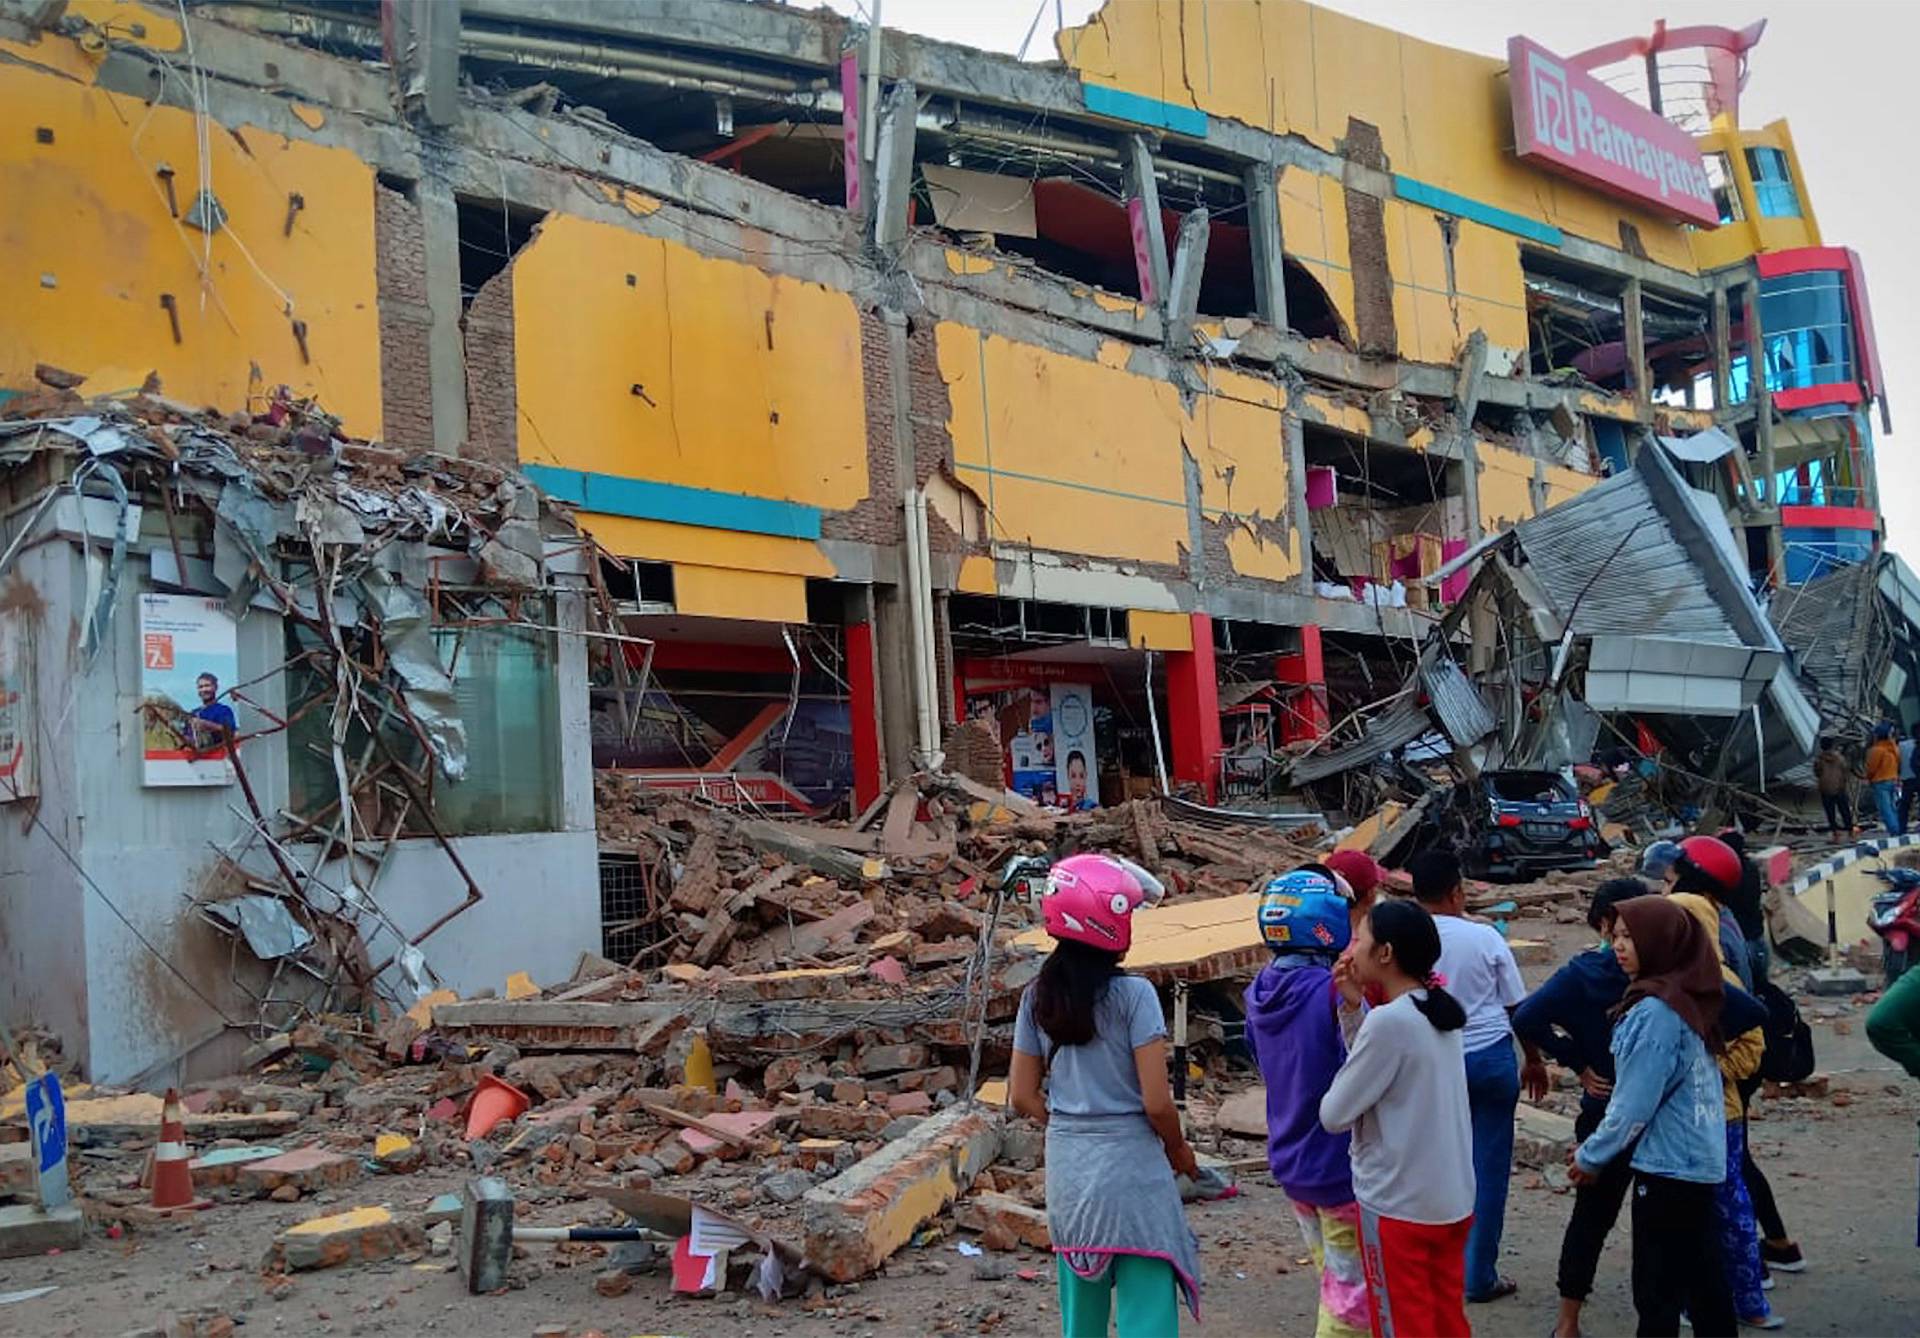 Residents stand in front of a damaged shopping mall after an earthquake hit Palu